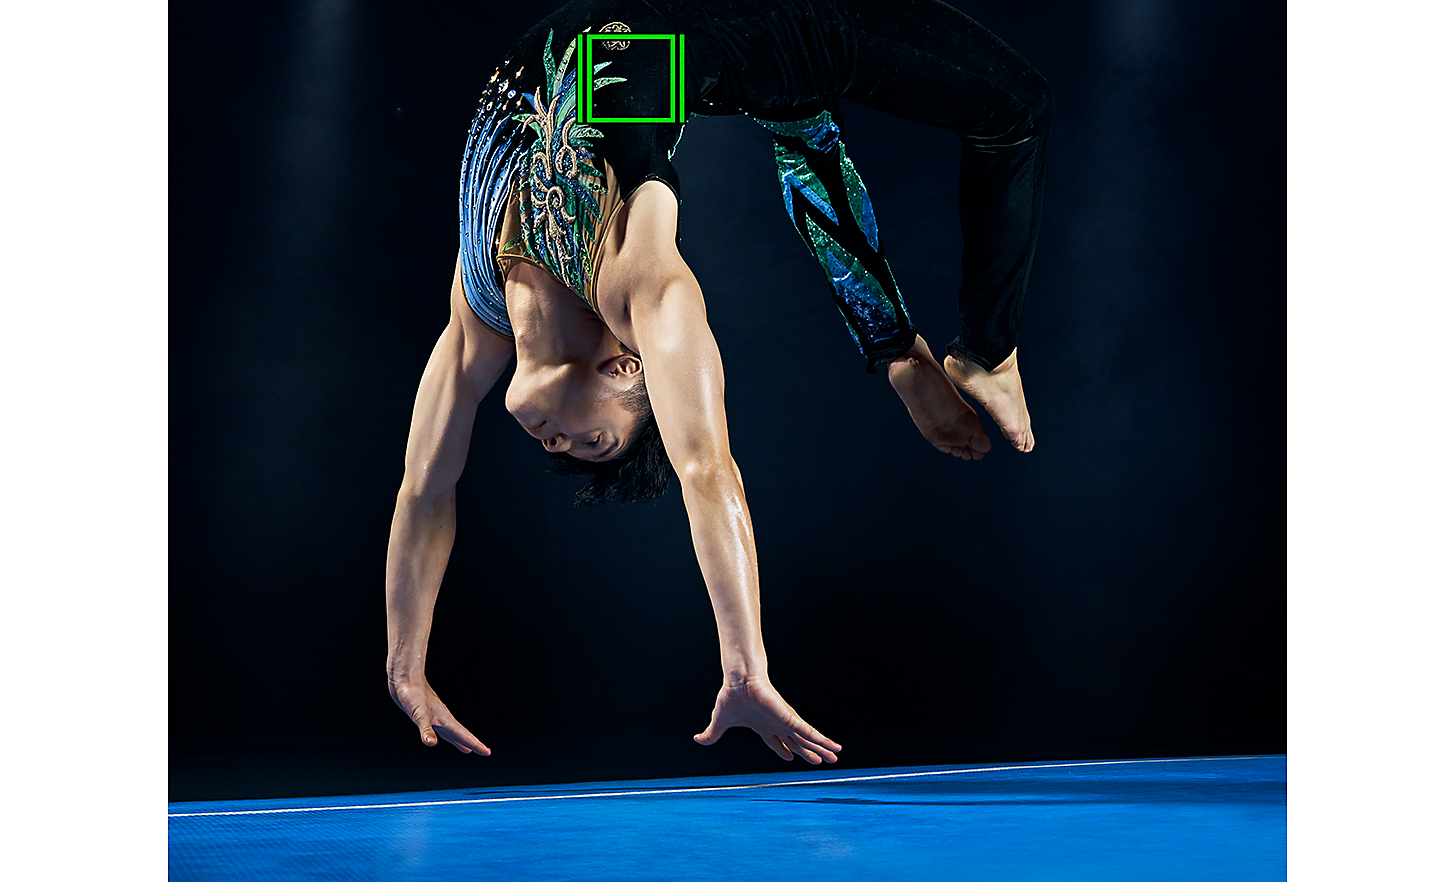 Dynamic image of a  tumbling gymnast - a green square represents Real-time Tracking